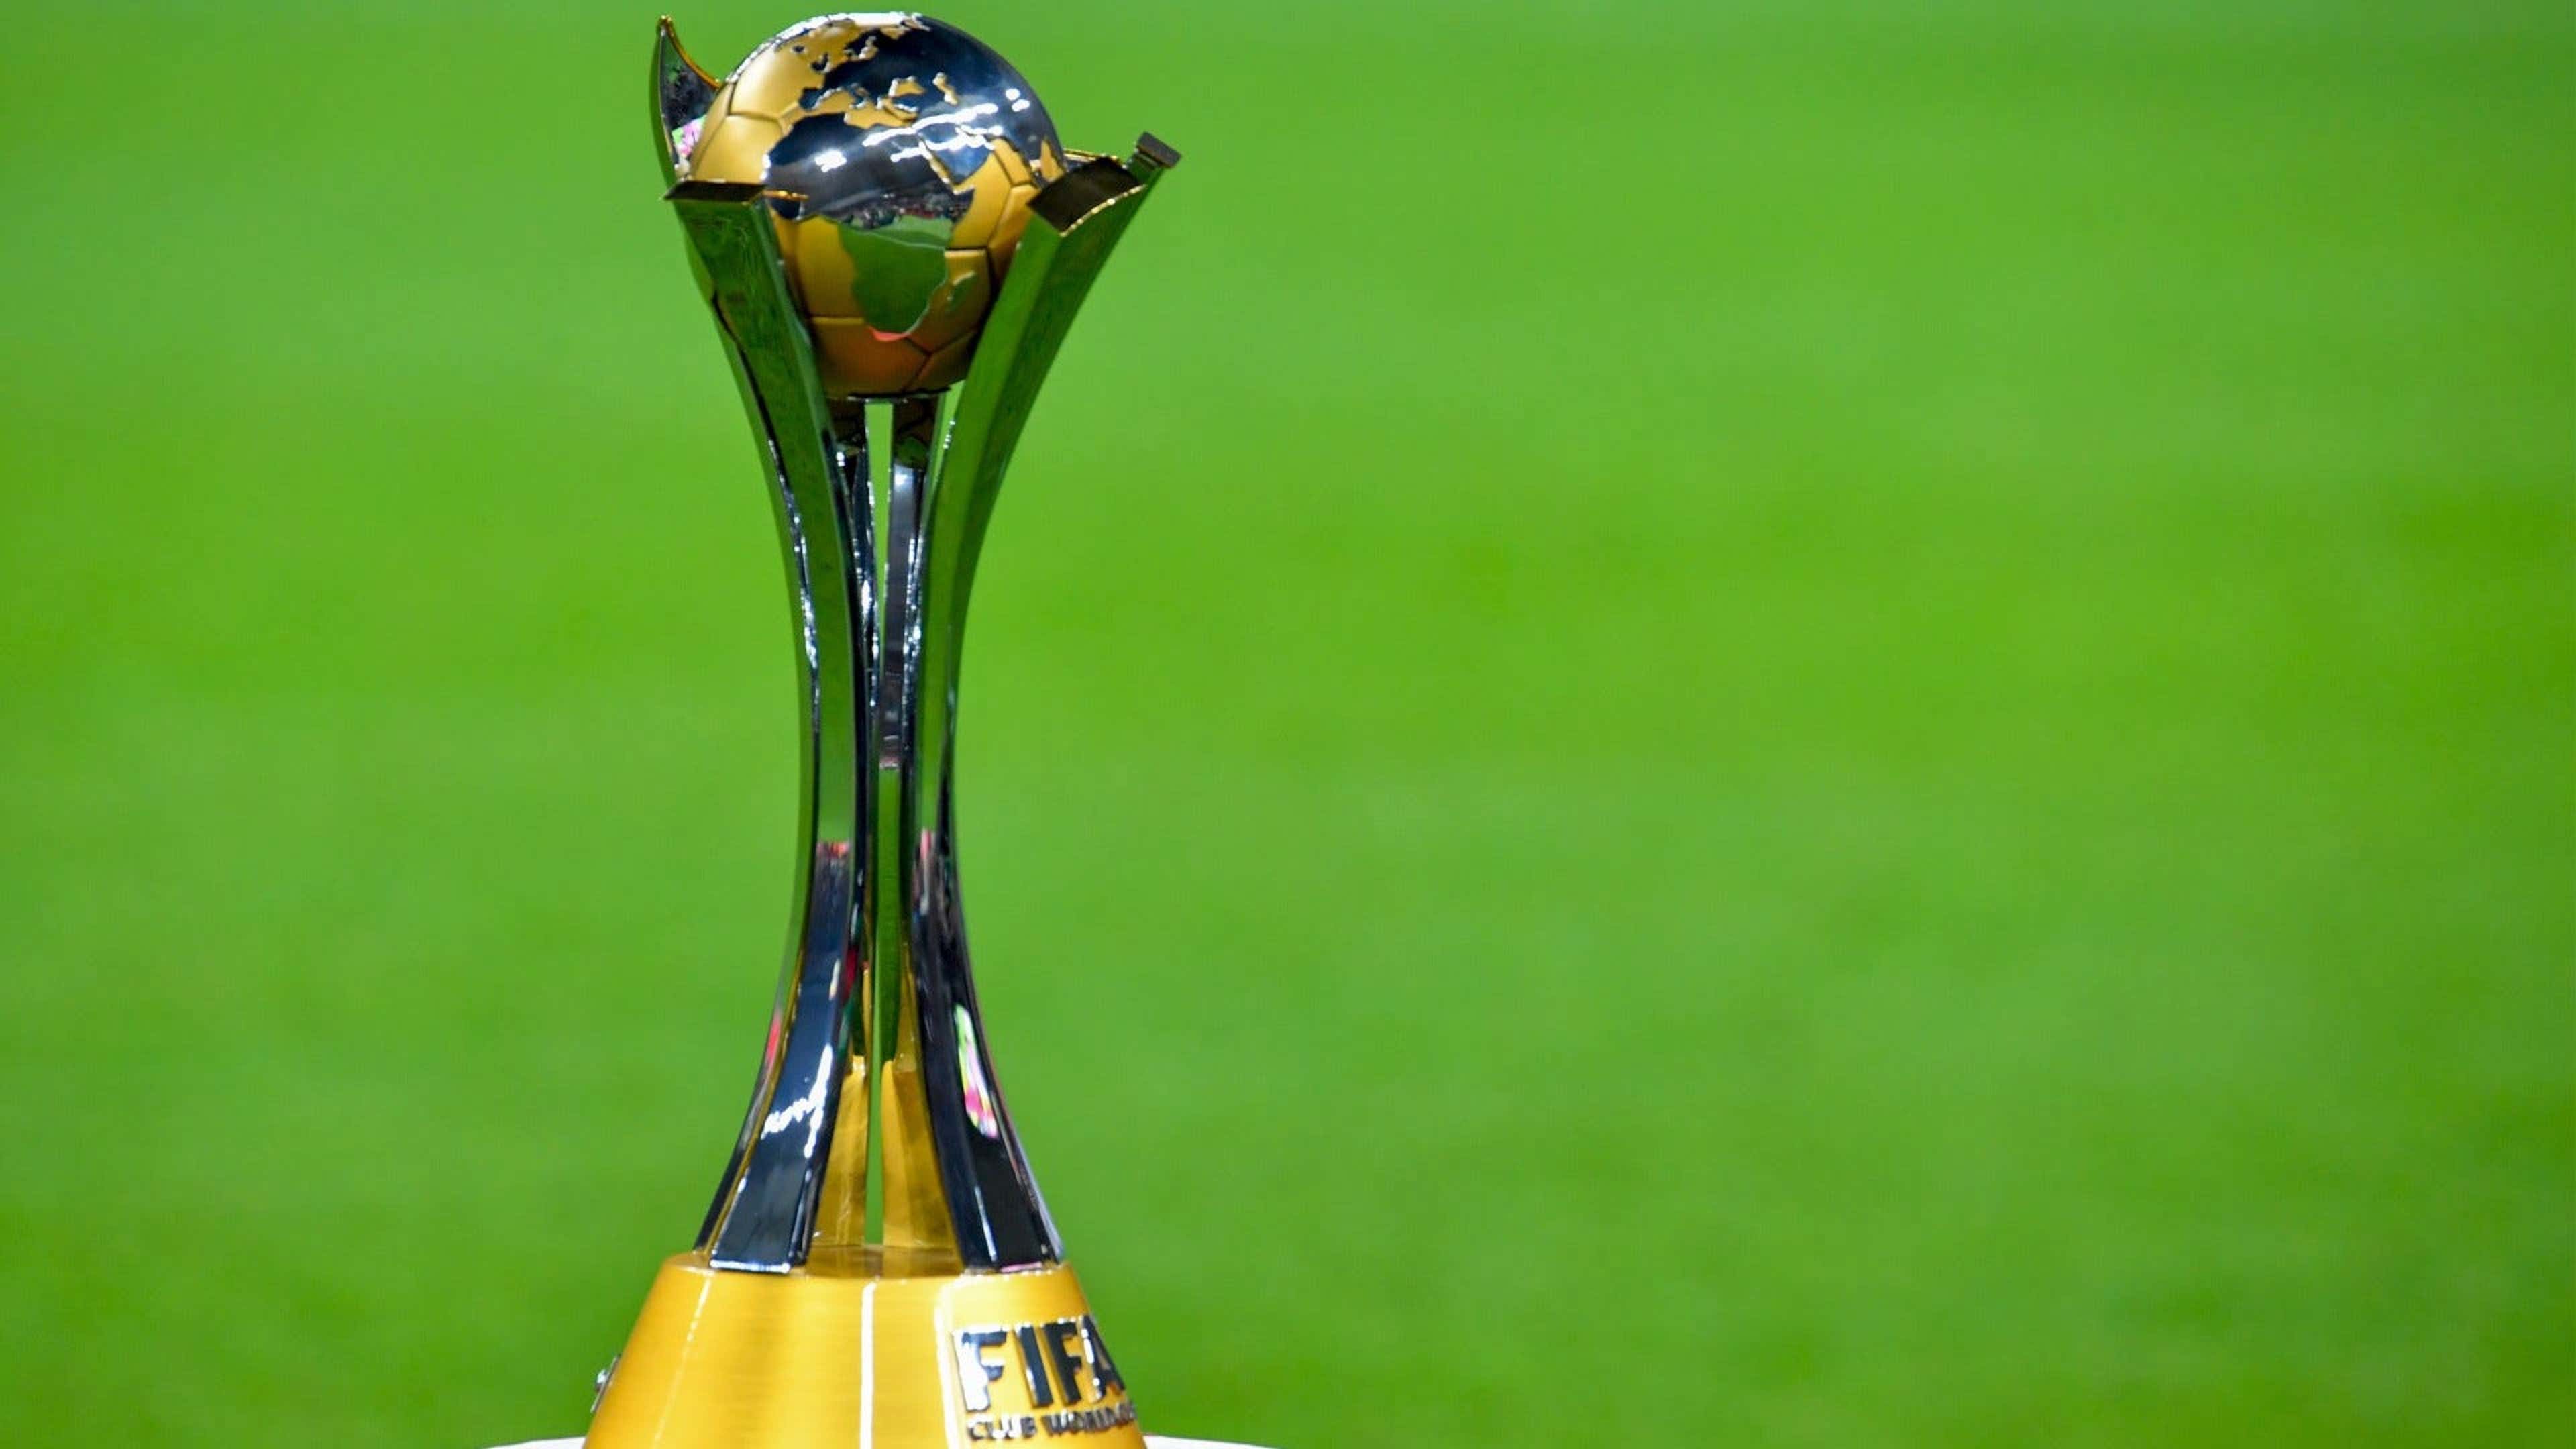 FIFA confirm time/date for Club World Cup draw - AS USA